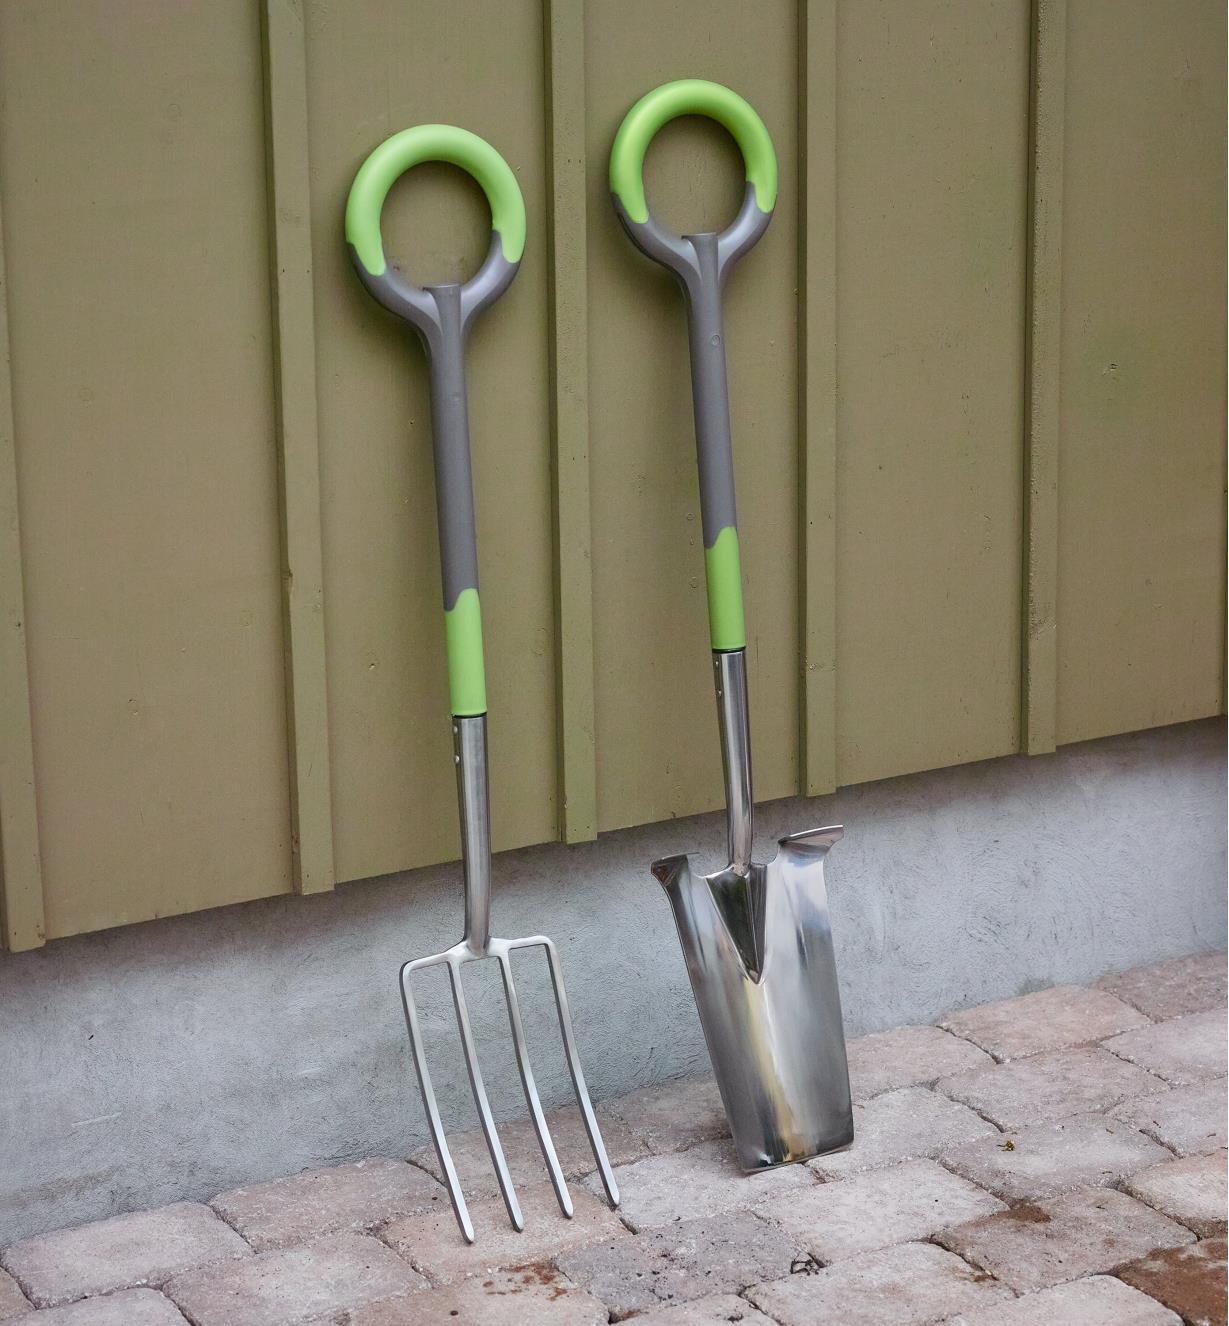 Radius ergonomic stainless-steel digging spade and fork leaning against a wall